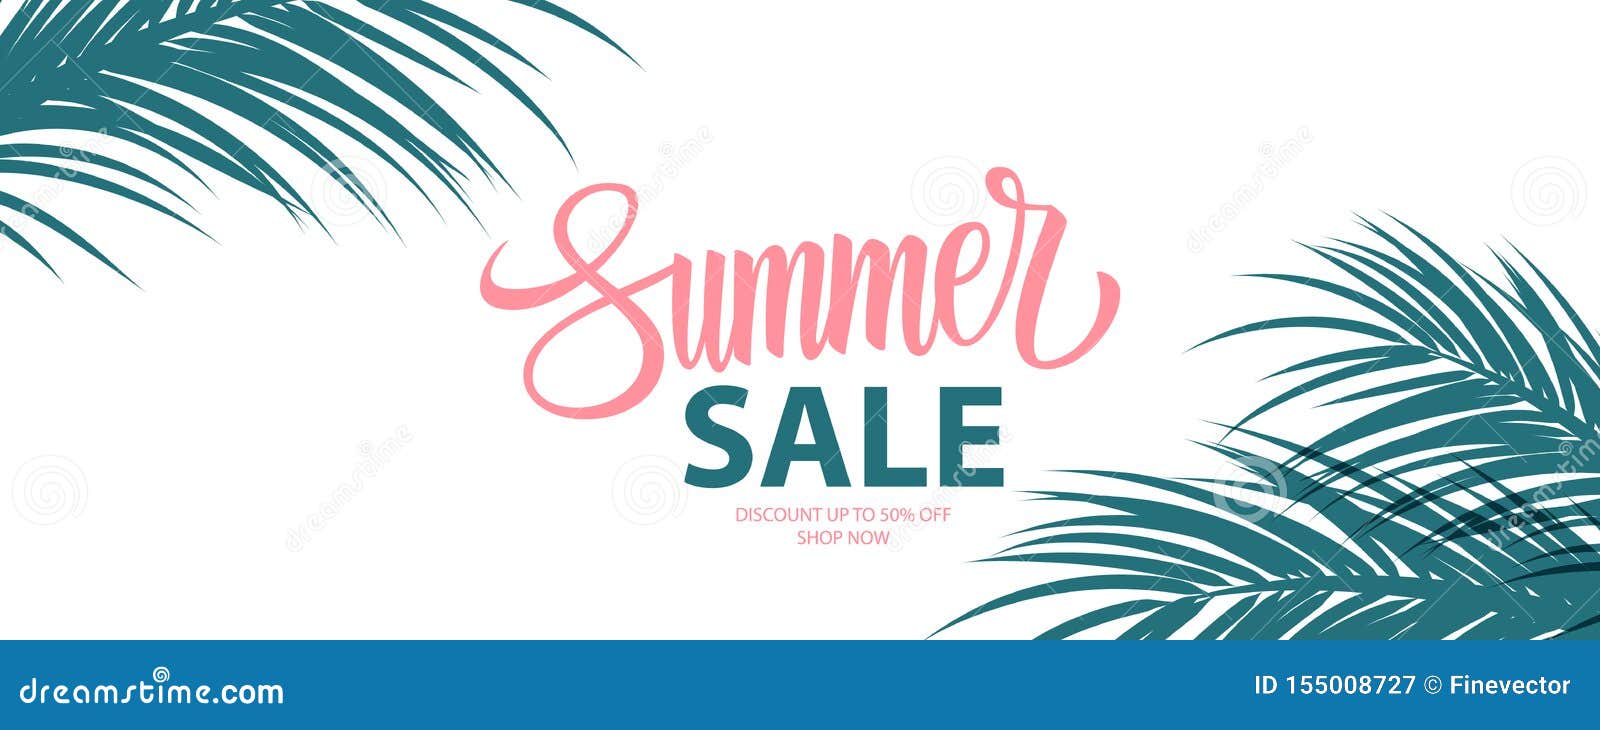 summer sale special offer banner. summertime seasonal background with hand lettering and palm leaves for business.